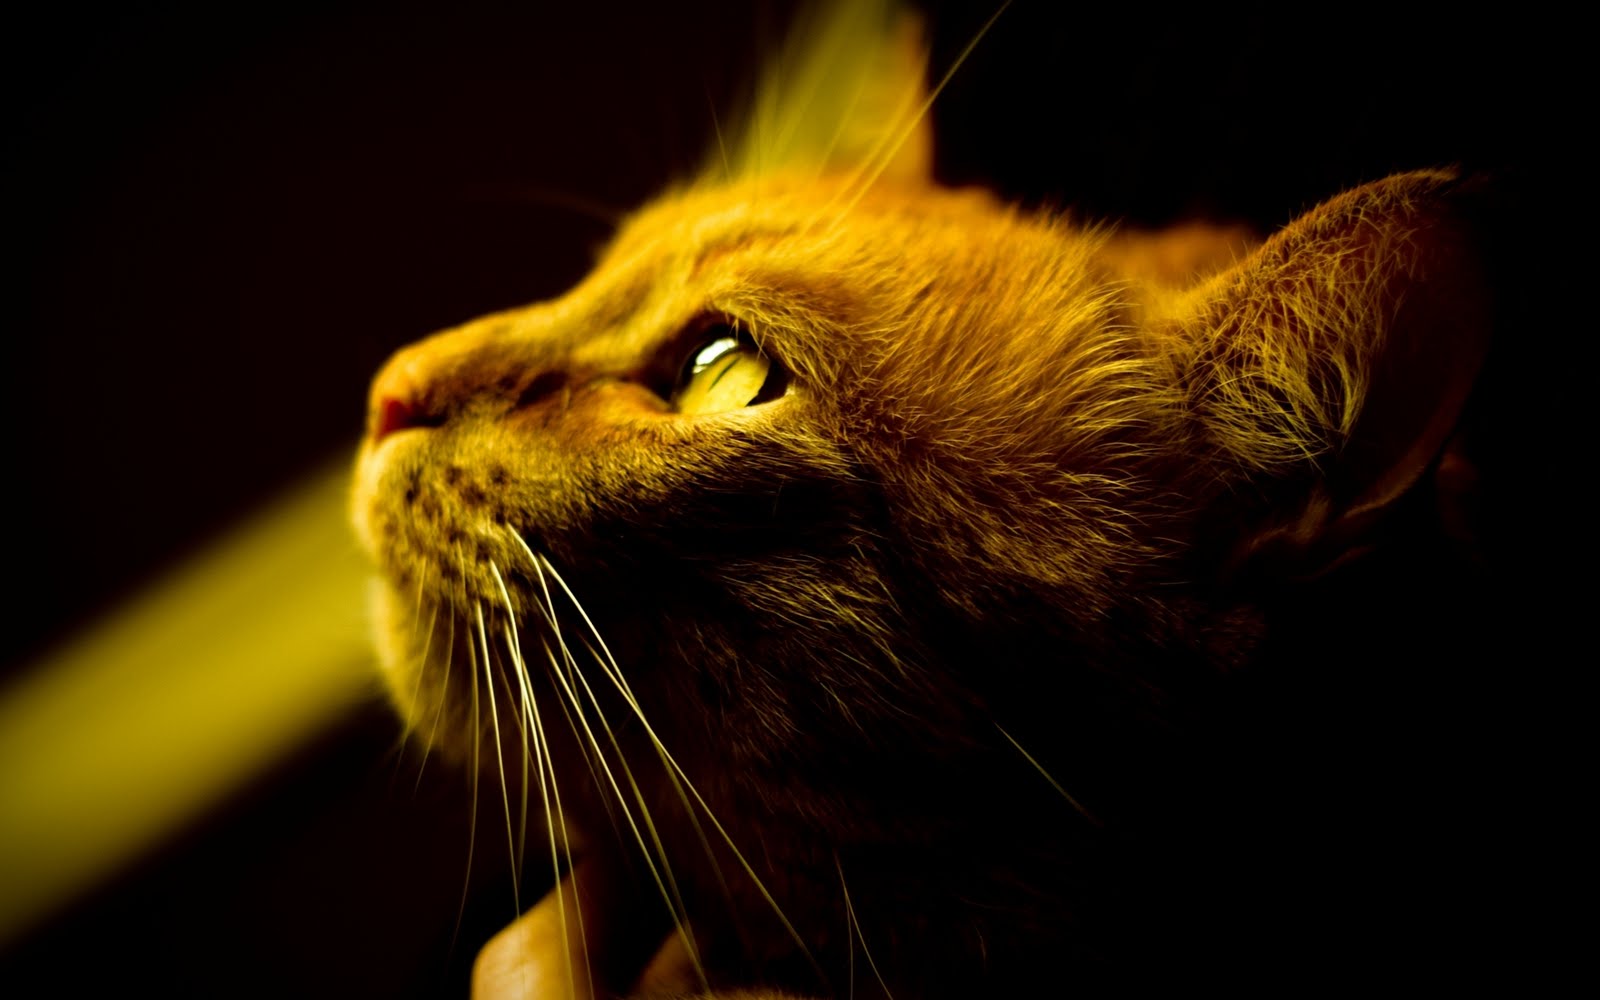 Cat In The Light Cool Eye 1080p HD Wallpaper Is A Great For